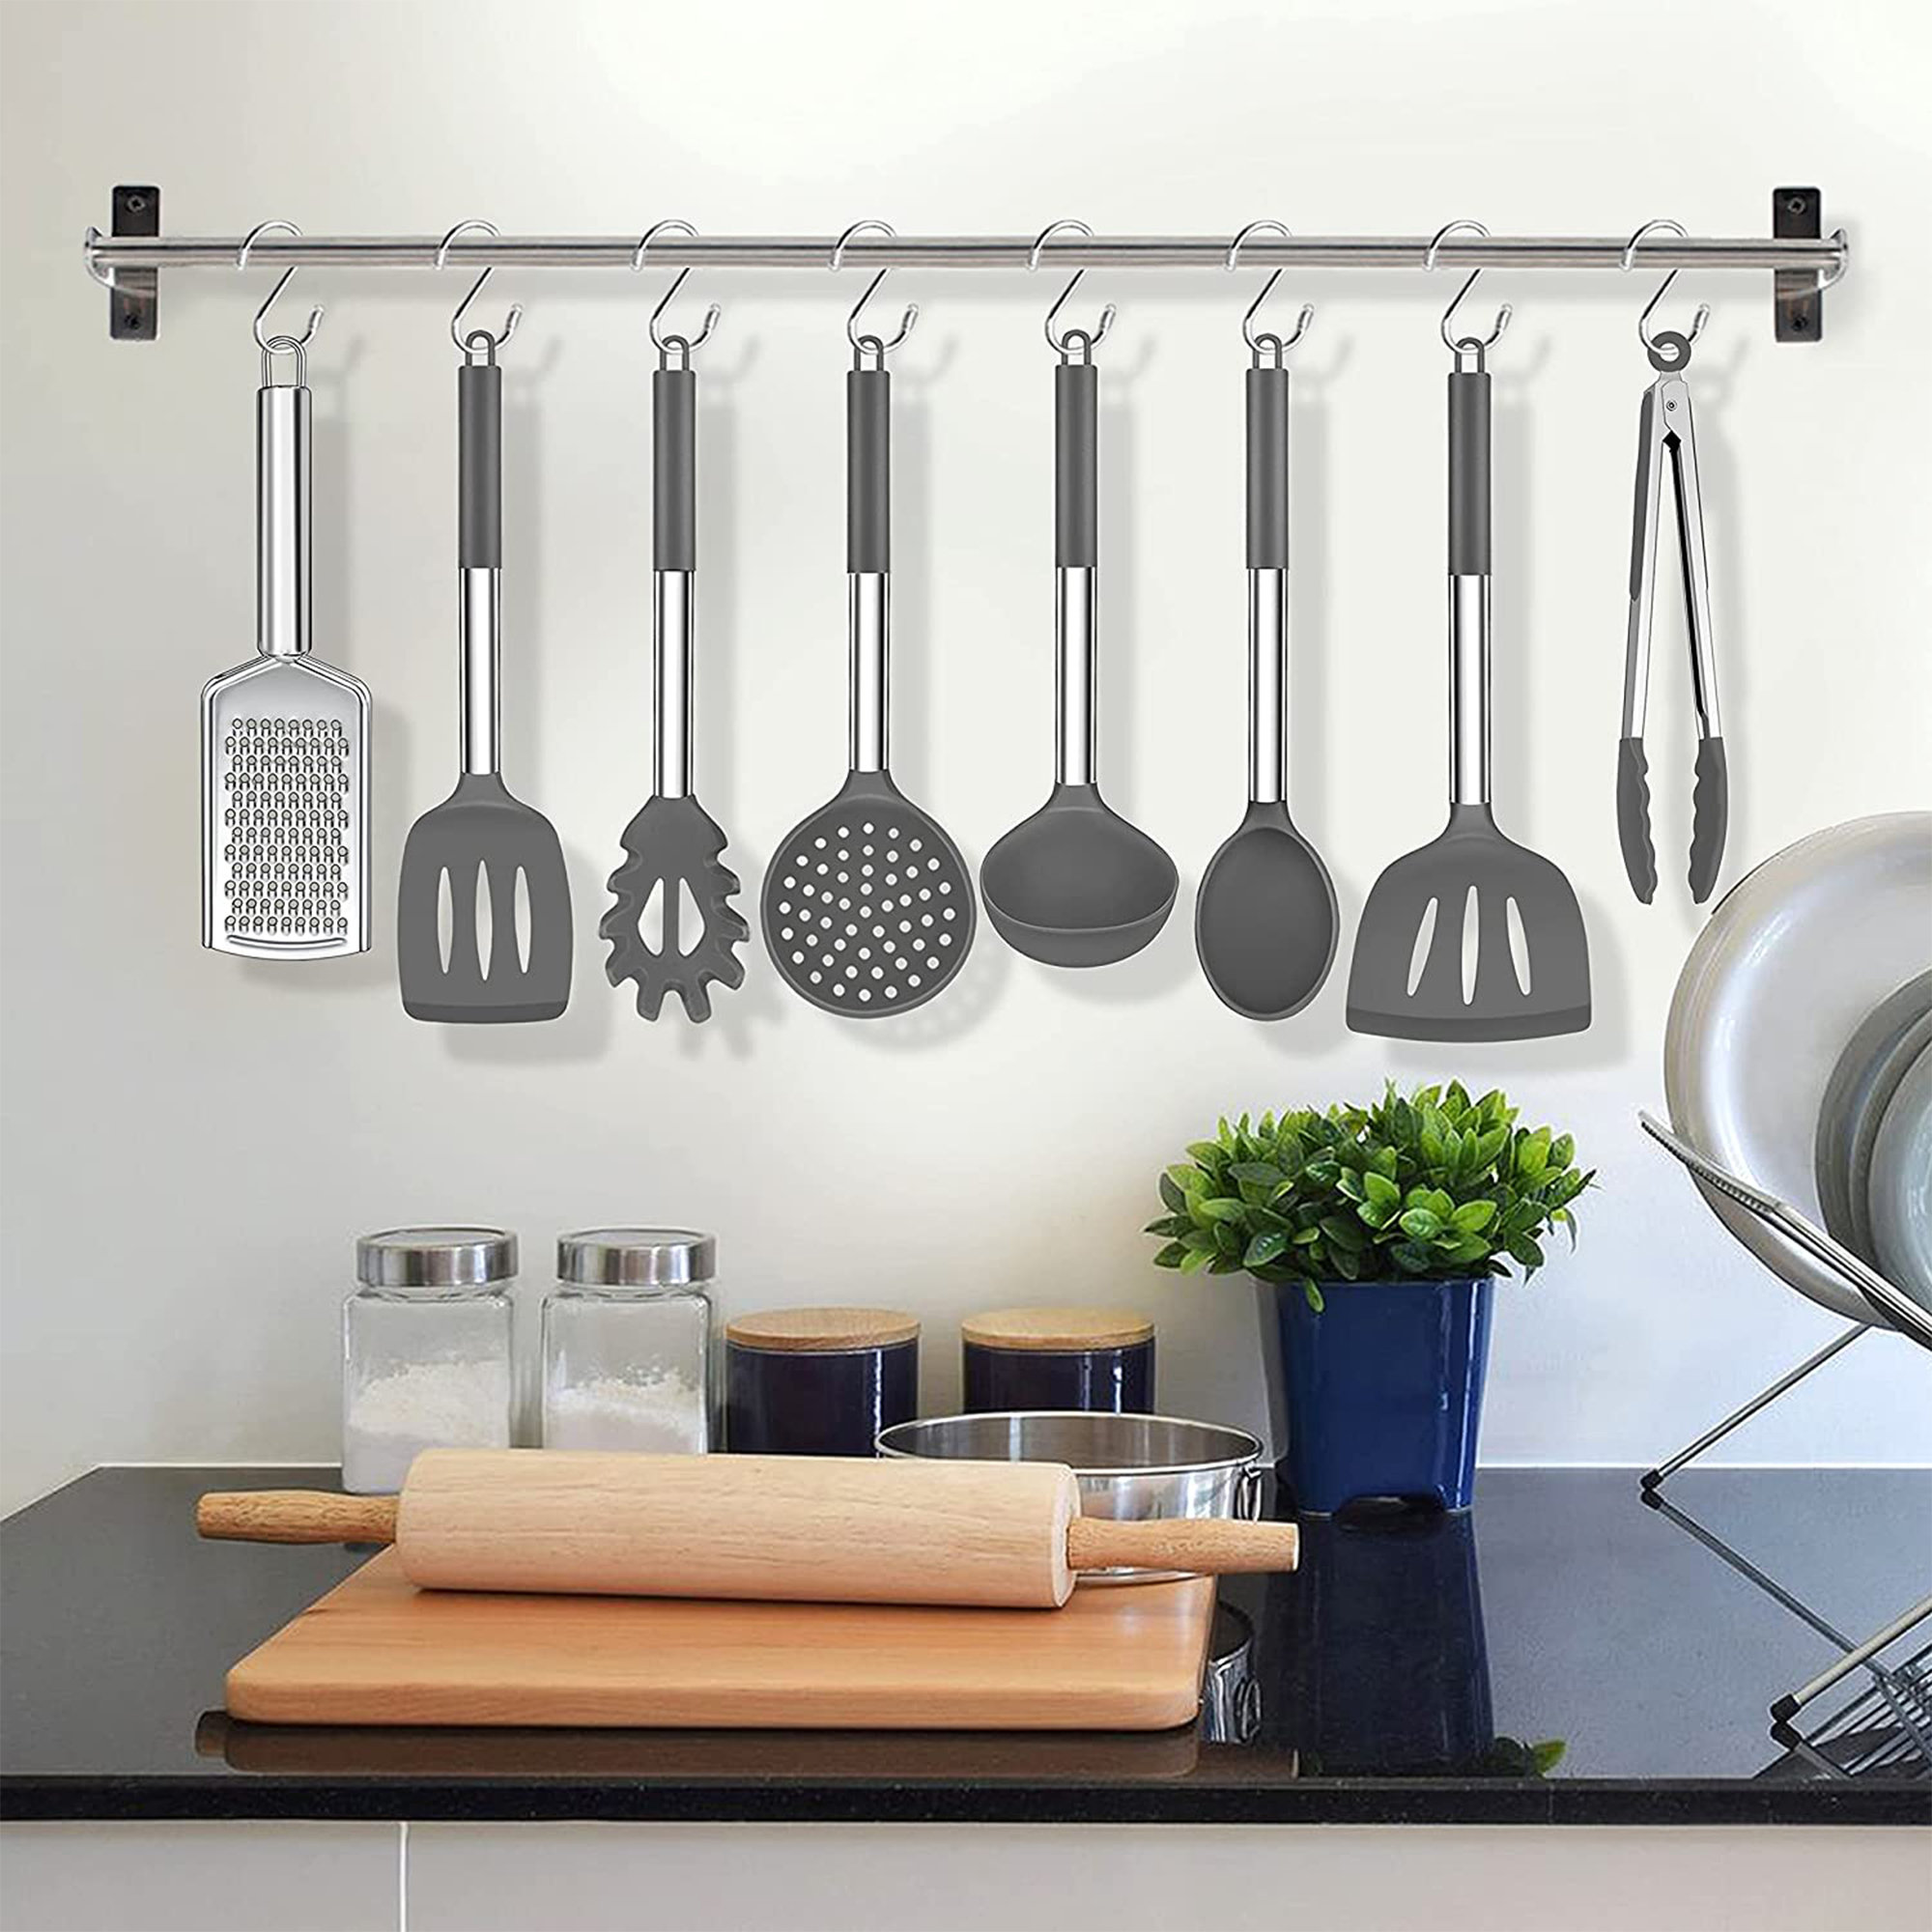 Baking Pan and Rack Set  Kitchen Products, Cookware and Baking Tools